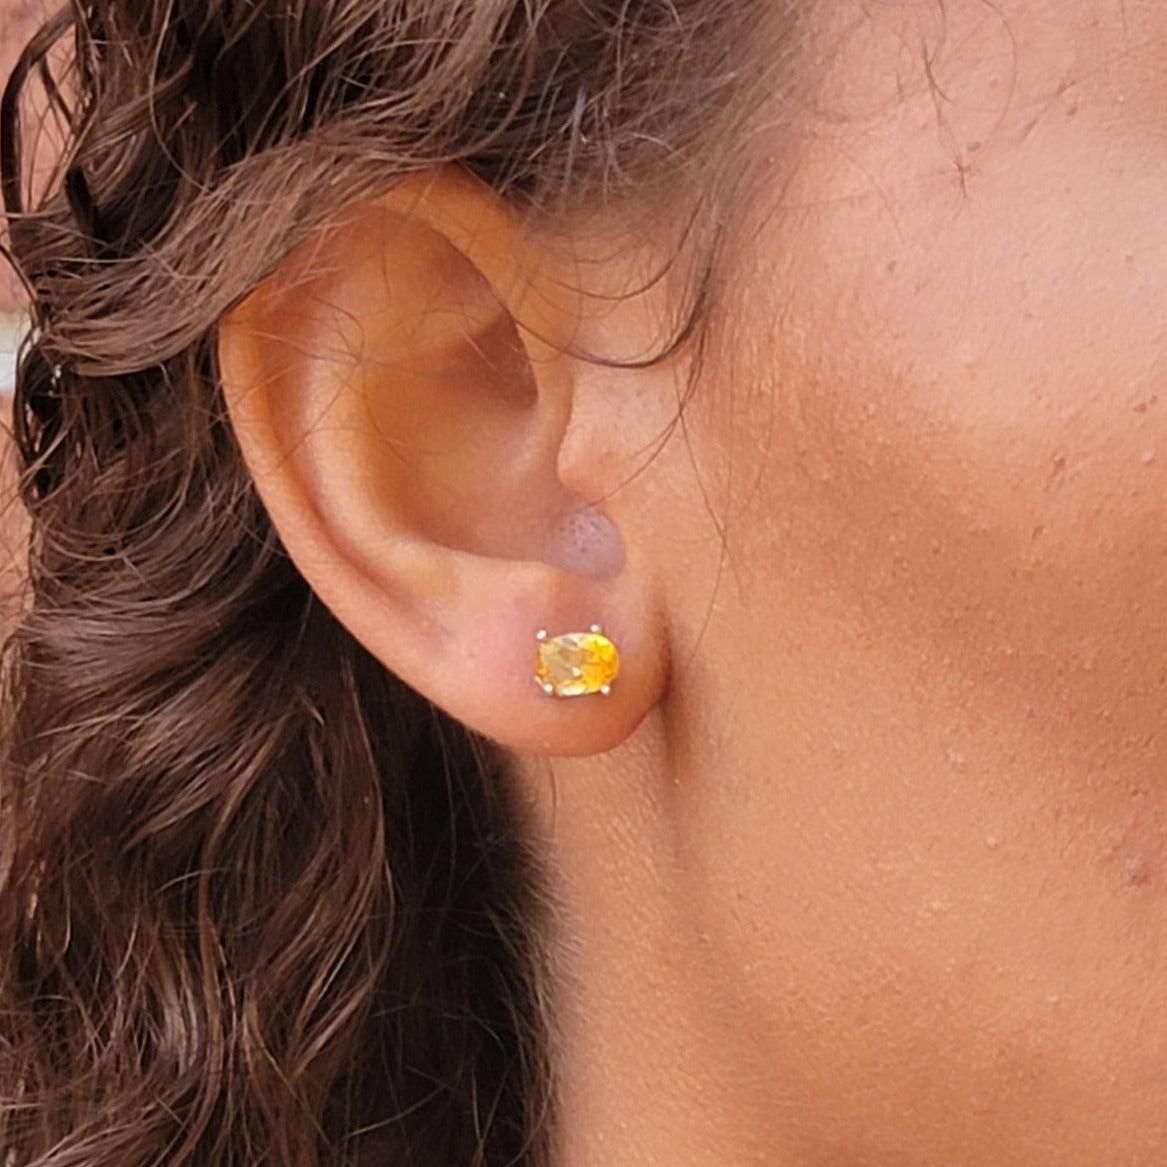 Authentic Oval Citrine Heart Earrings - Uniquelan Jewelry